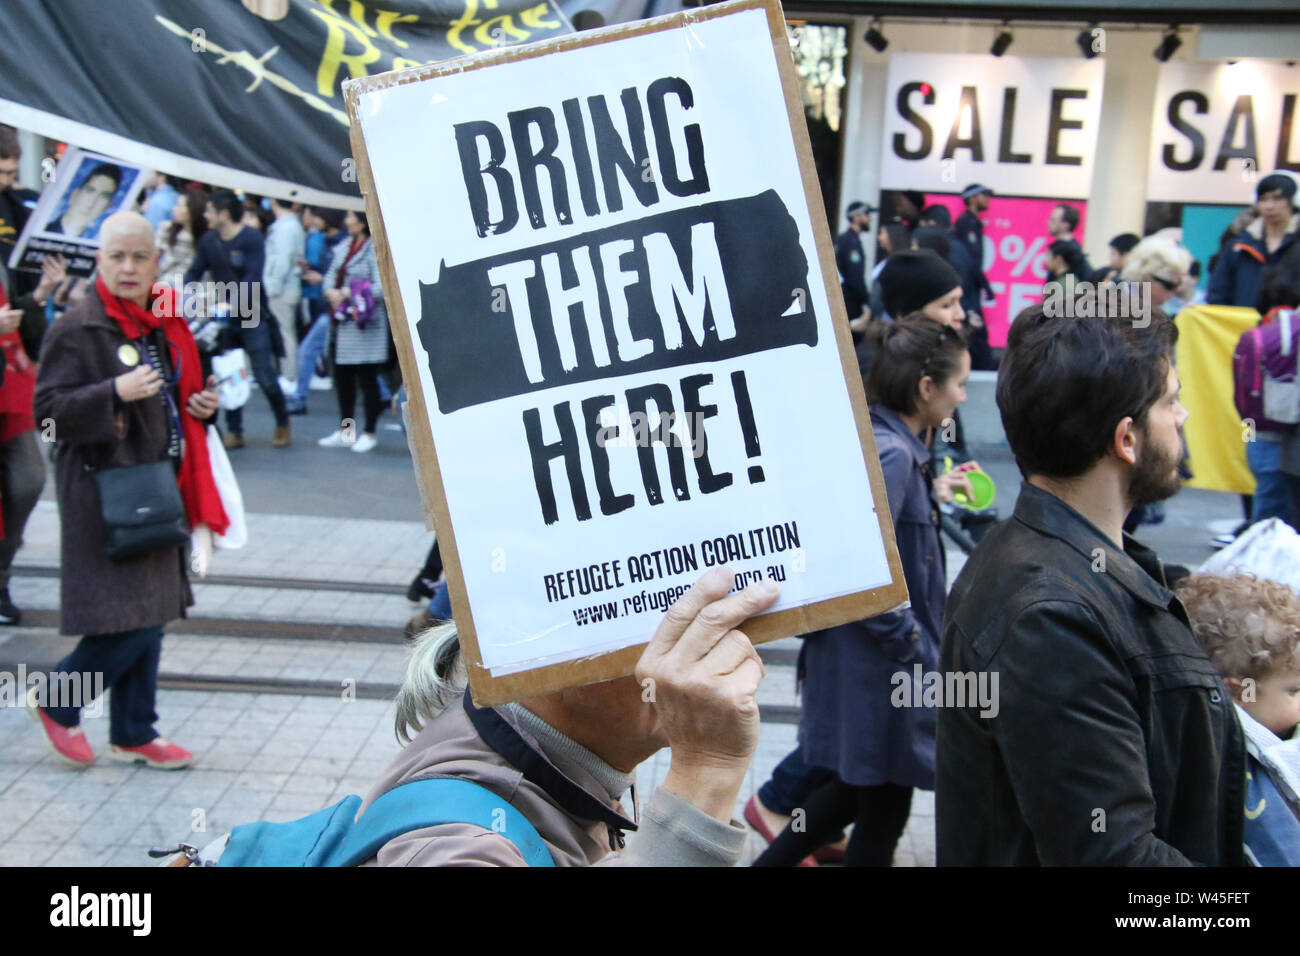 Sydney, Australia. 20th July 2019. Protesters in support of refugees held a rally and march on 6th anniversary of the signing of the Regional Resettlement Arrangement policy involving Manus Island and Nauru detention centres on 19th July 2013. Credit: Richard Milnes/Alamy Live News Stock Photo